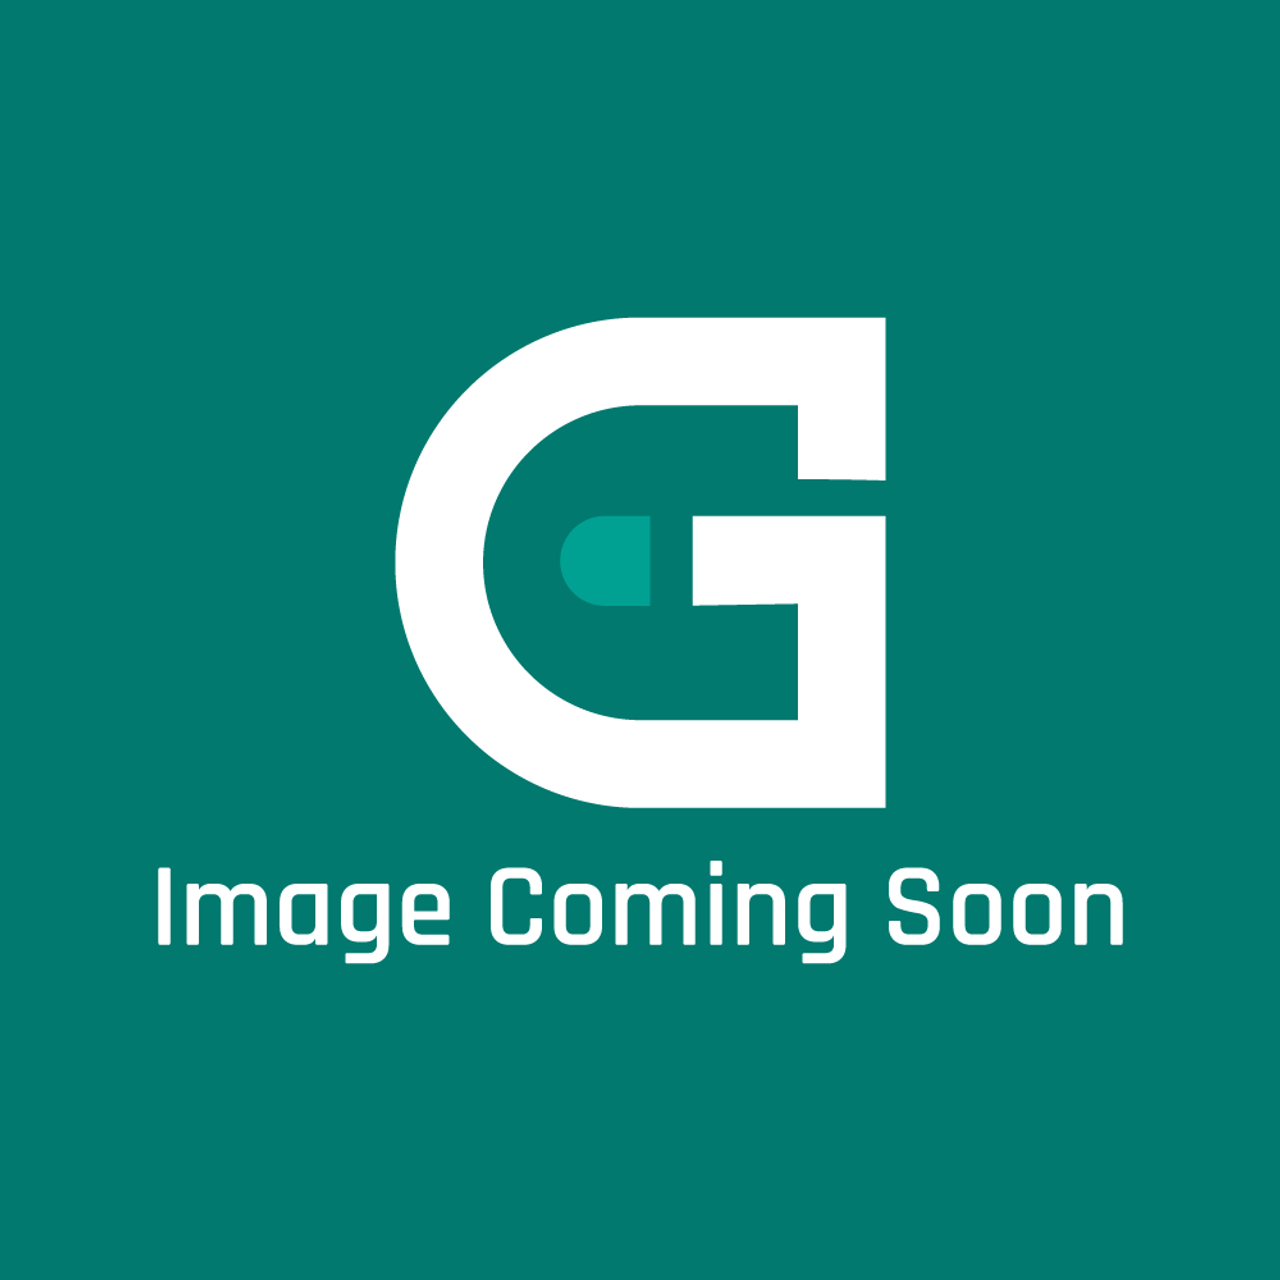 Frigidaire - Electrolux 62602HQ Ah Hvr A /Biss S Pr - Image Coming Soon!